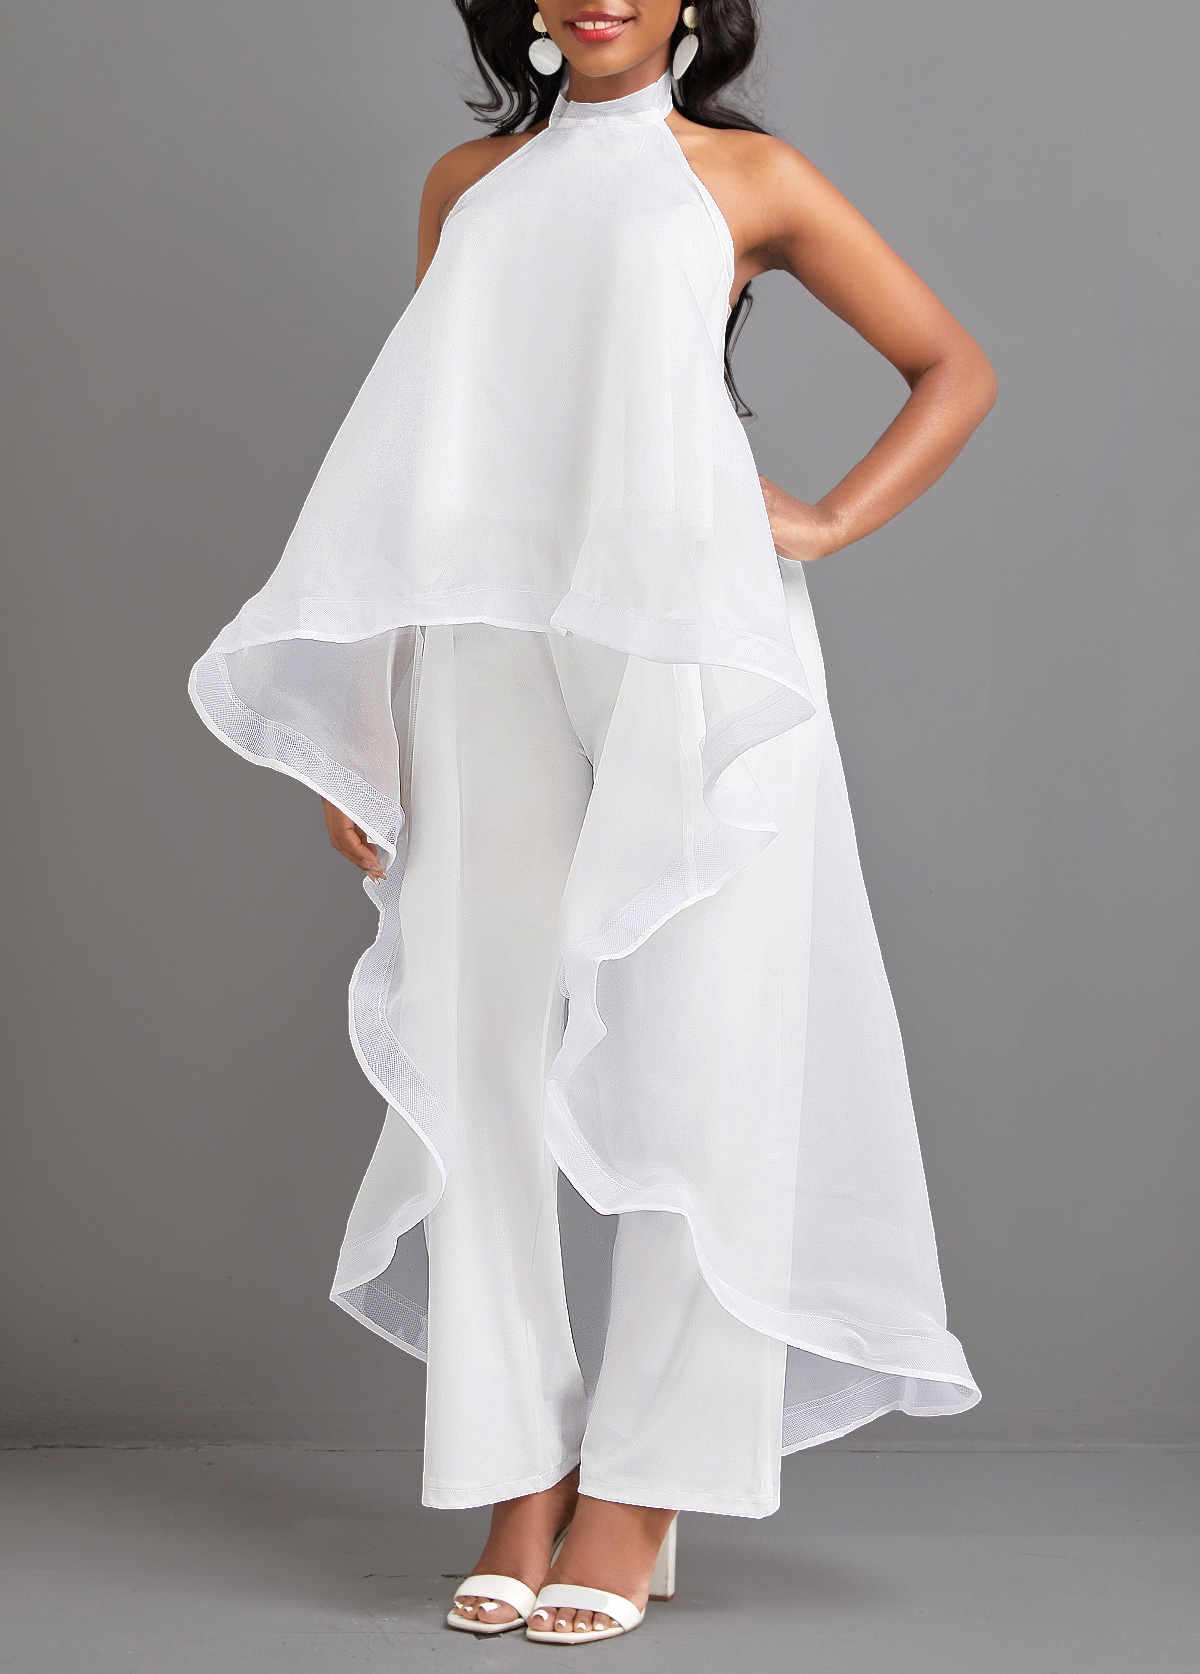 White Tie Ankle Length Sleeveless Top and Pants